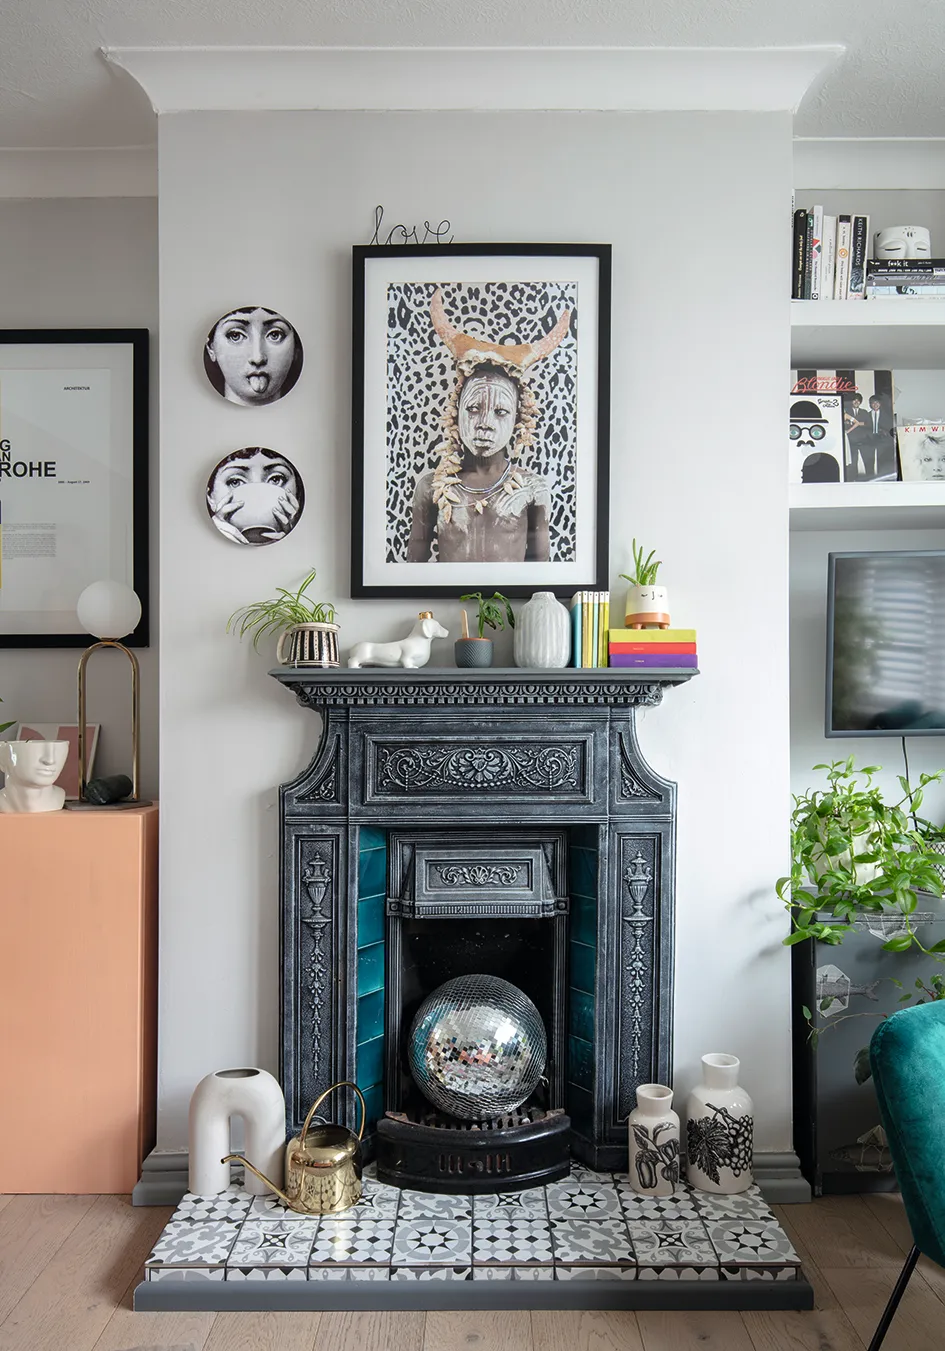 Although not original to the house, Maxine has kept the Victorian-style fireplace that she dusted with white paint to highlight the ironwork details. The artwork is by Lumitrix.